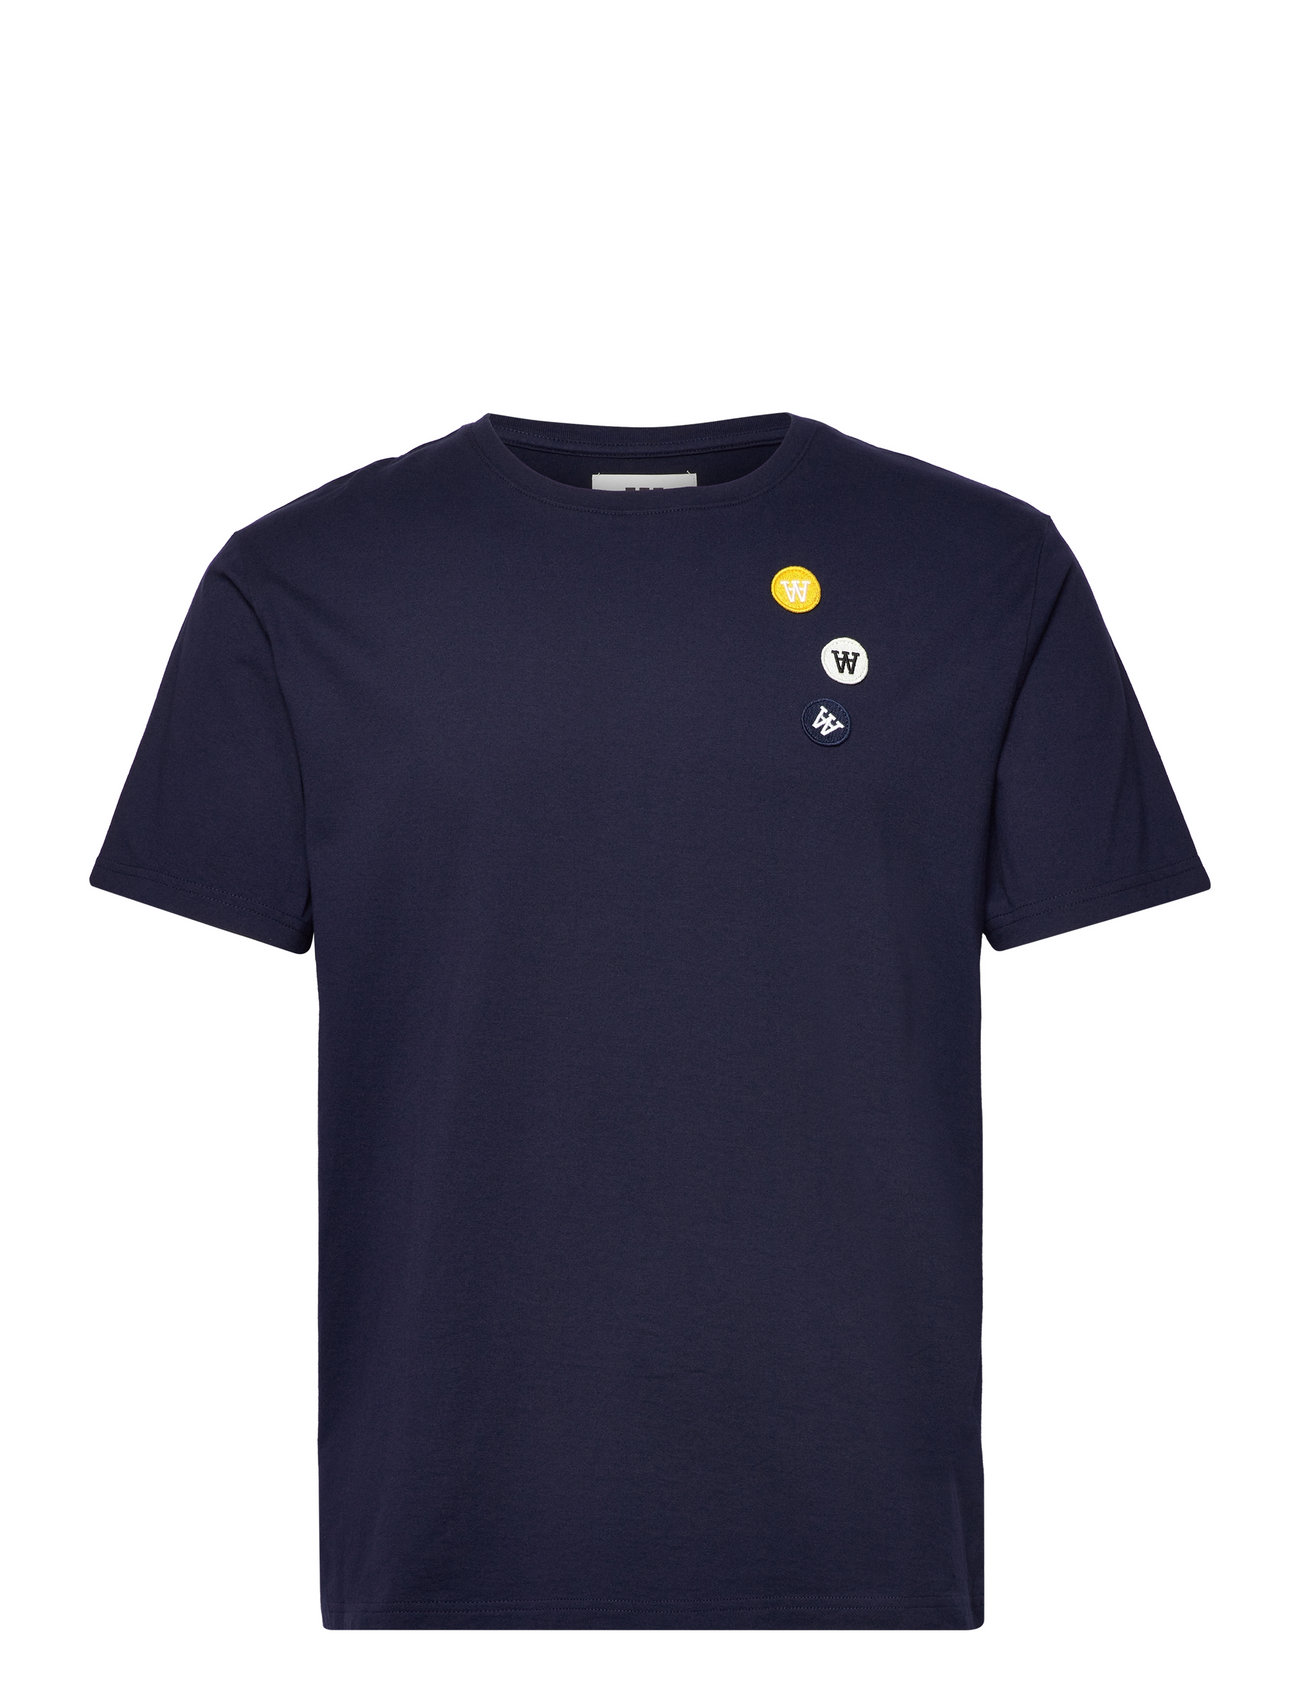 Ace Patches T-Shirt Tops T-Kortærmet Skjorte Navy Double A By Wood Wood